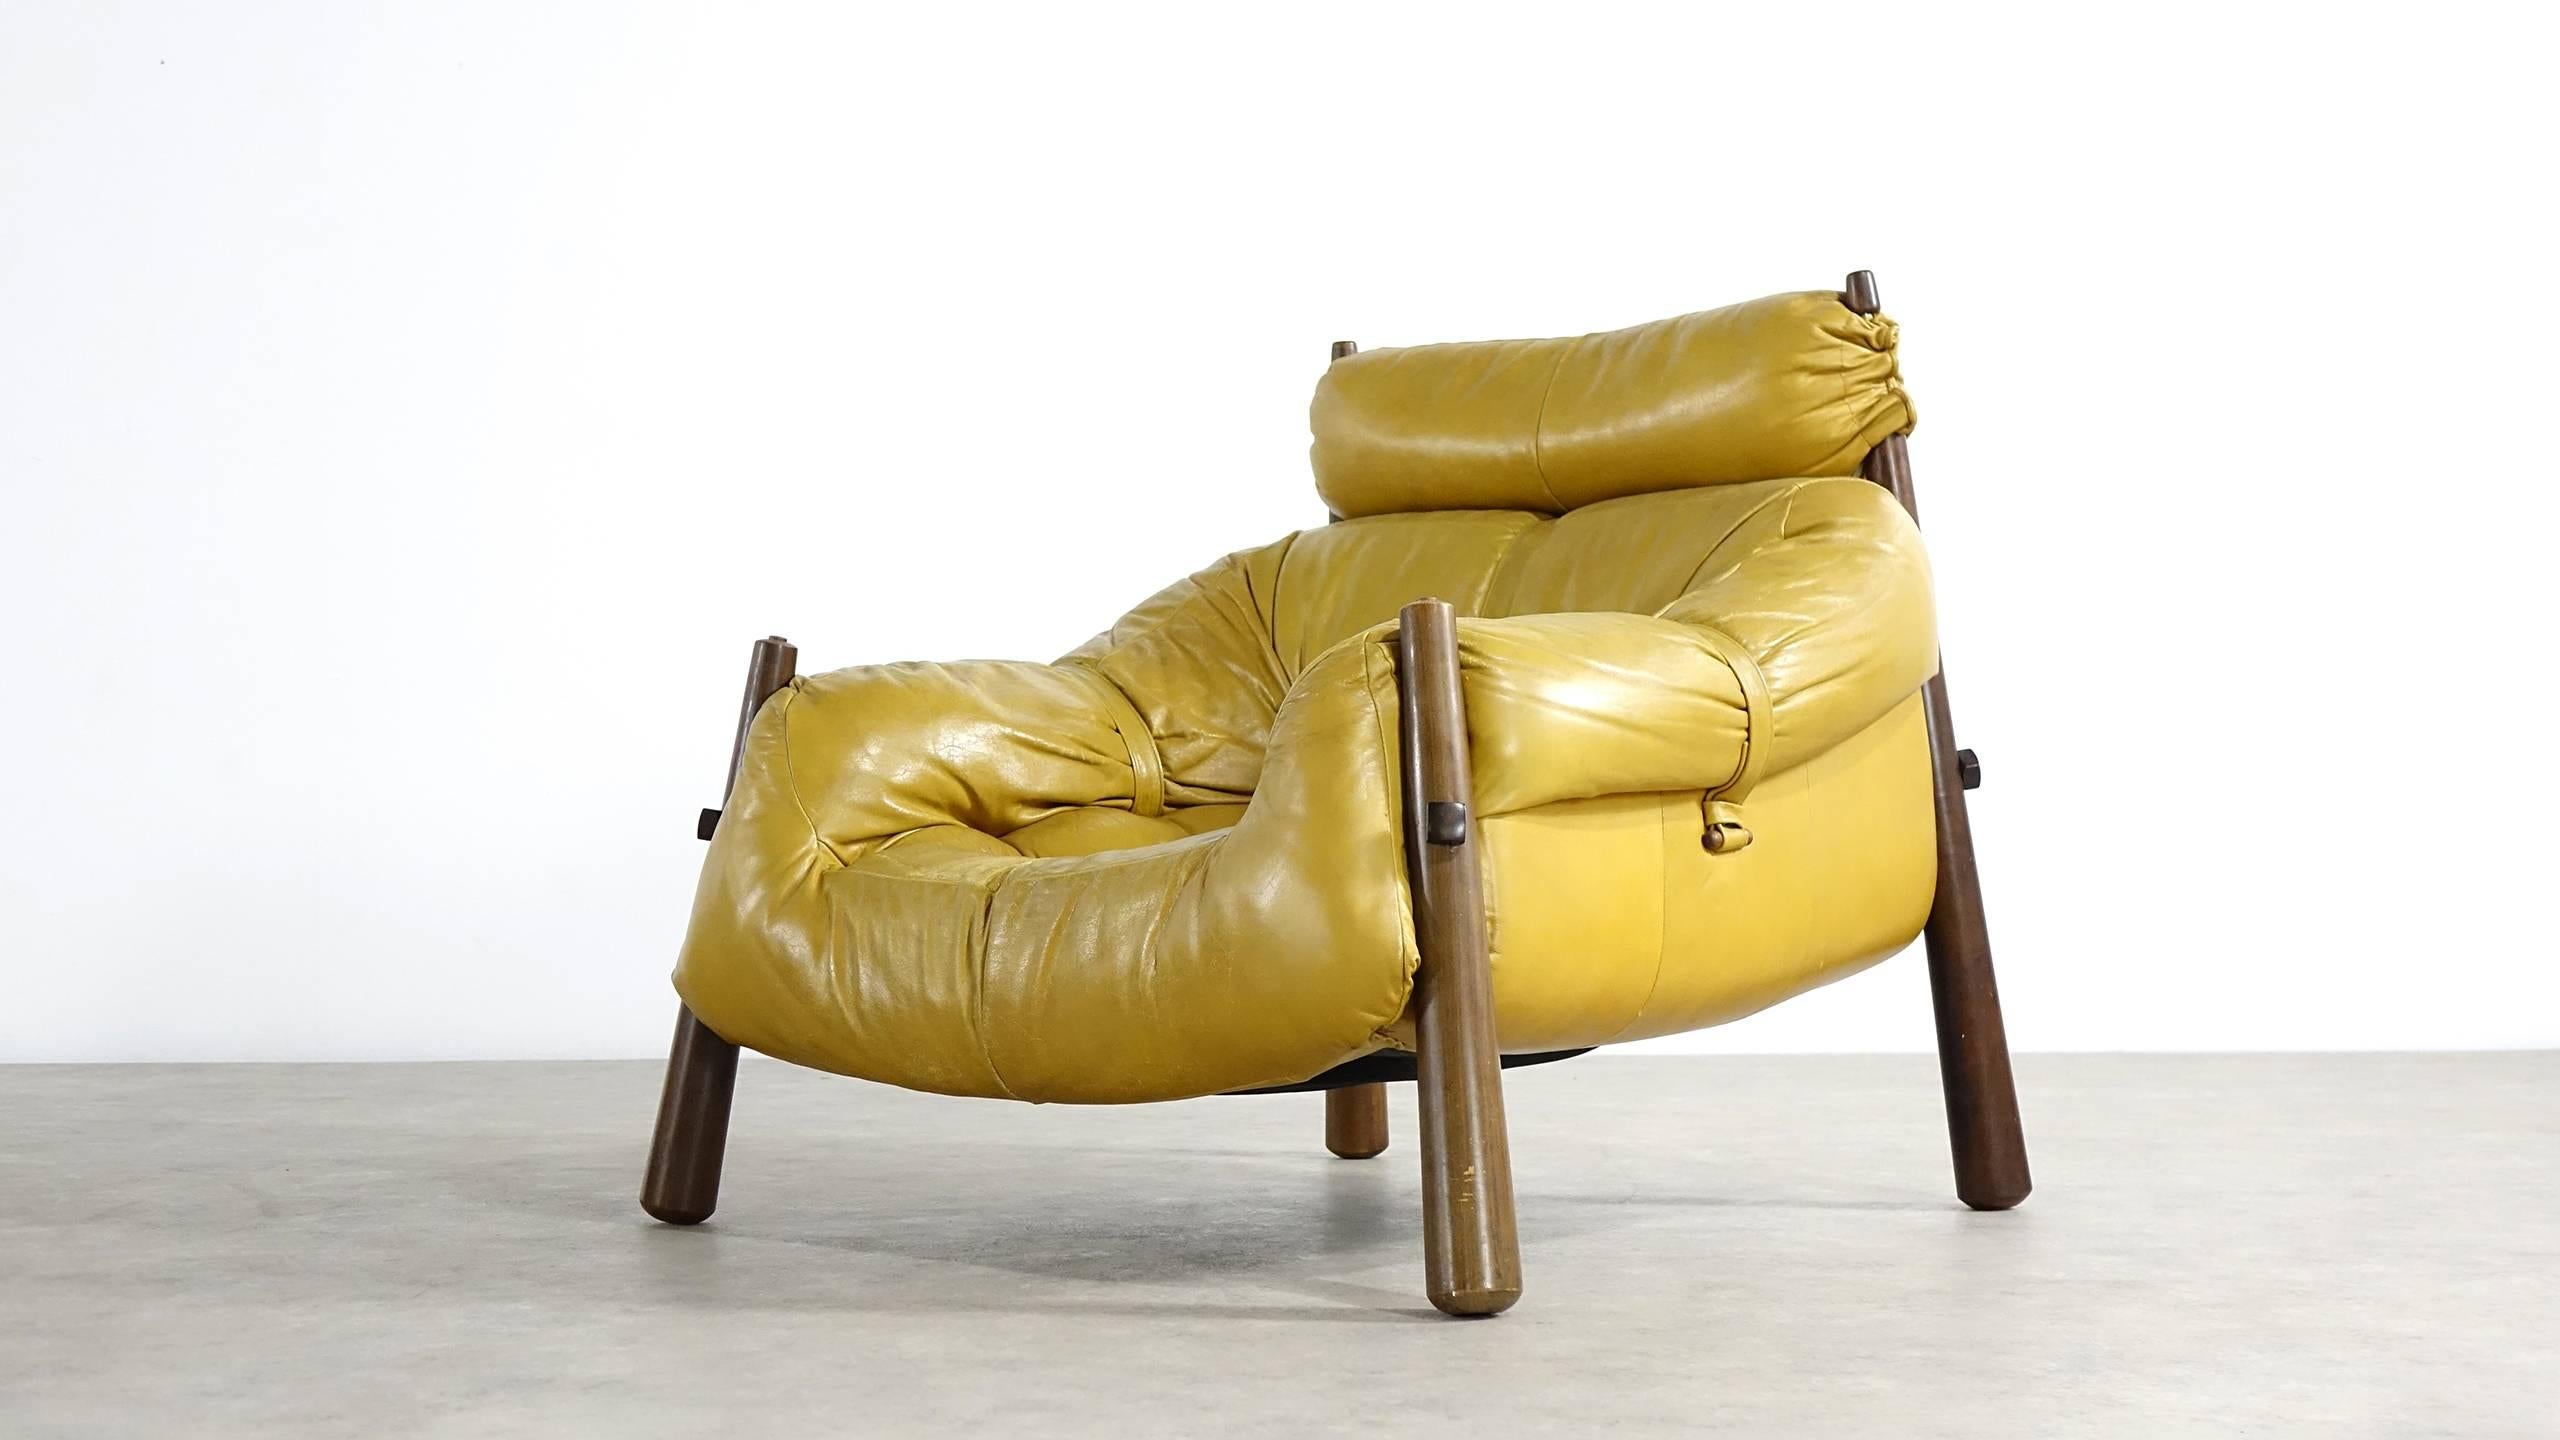 Mid-Century Modern Brazilian Lounge Three-Seat Sofa by Percival Lafer for Lafer S.A. 1958